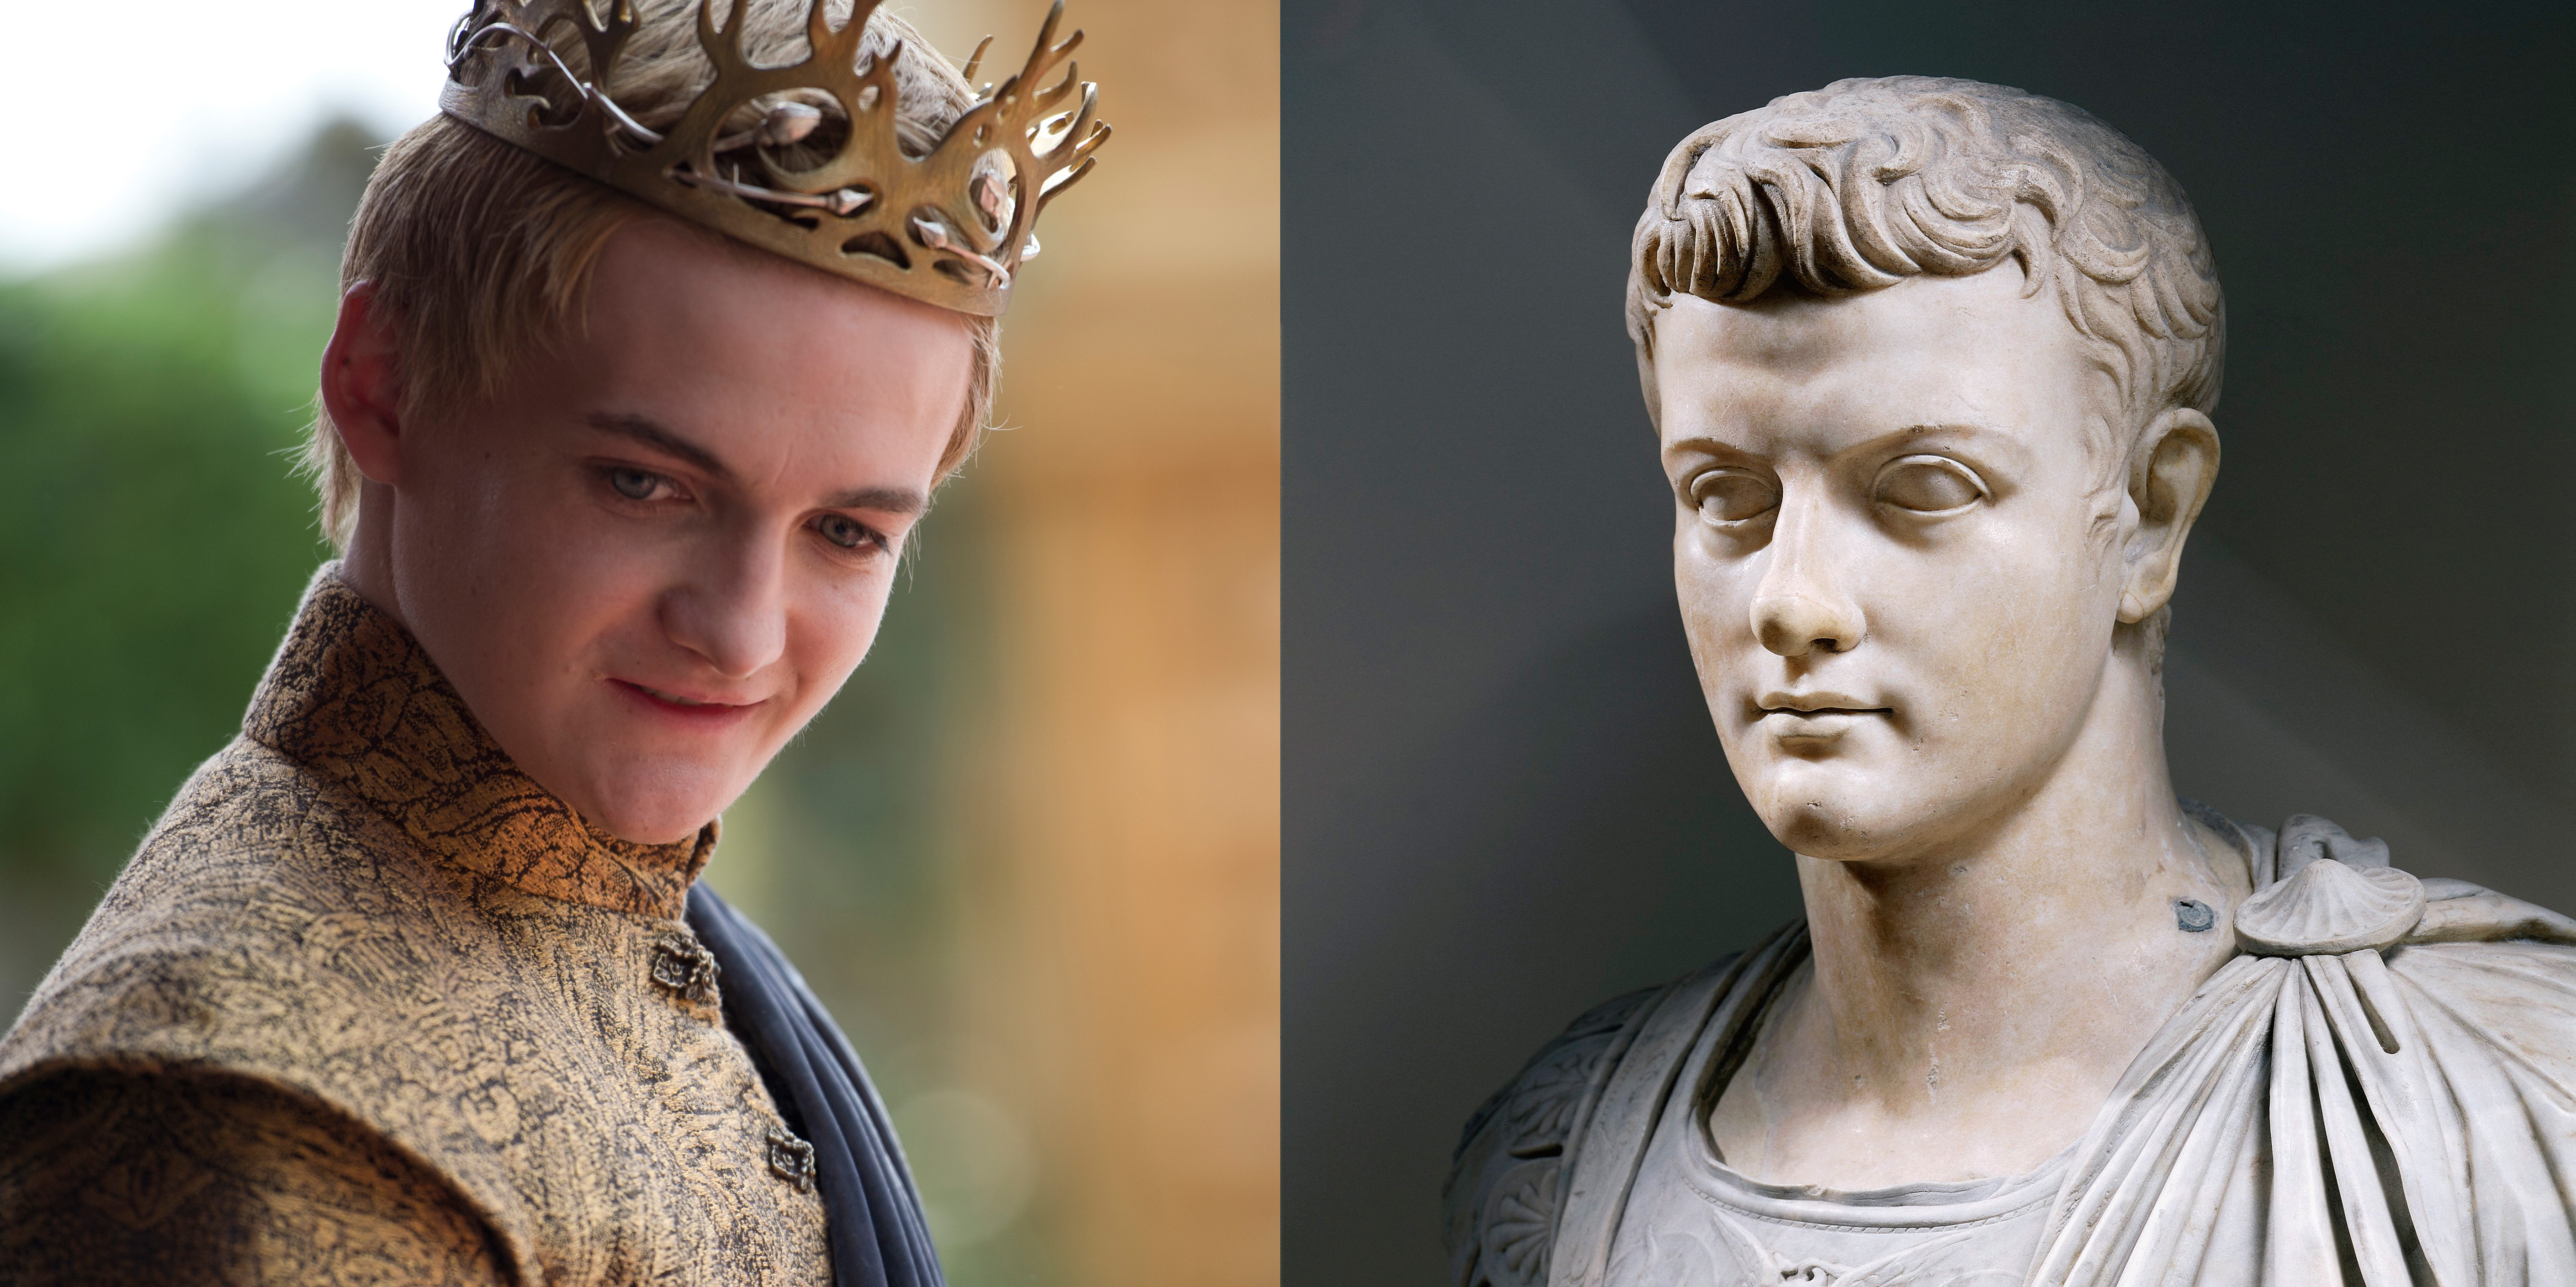 From left: Joffrey and Caligula.